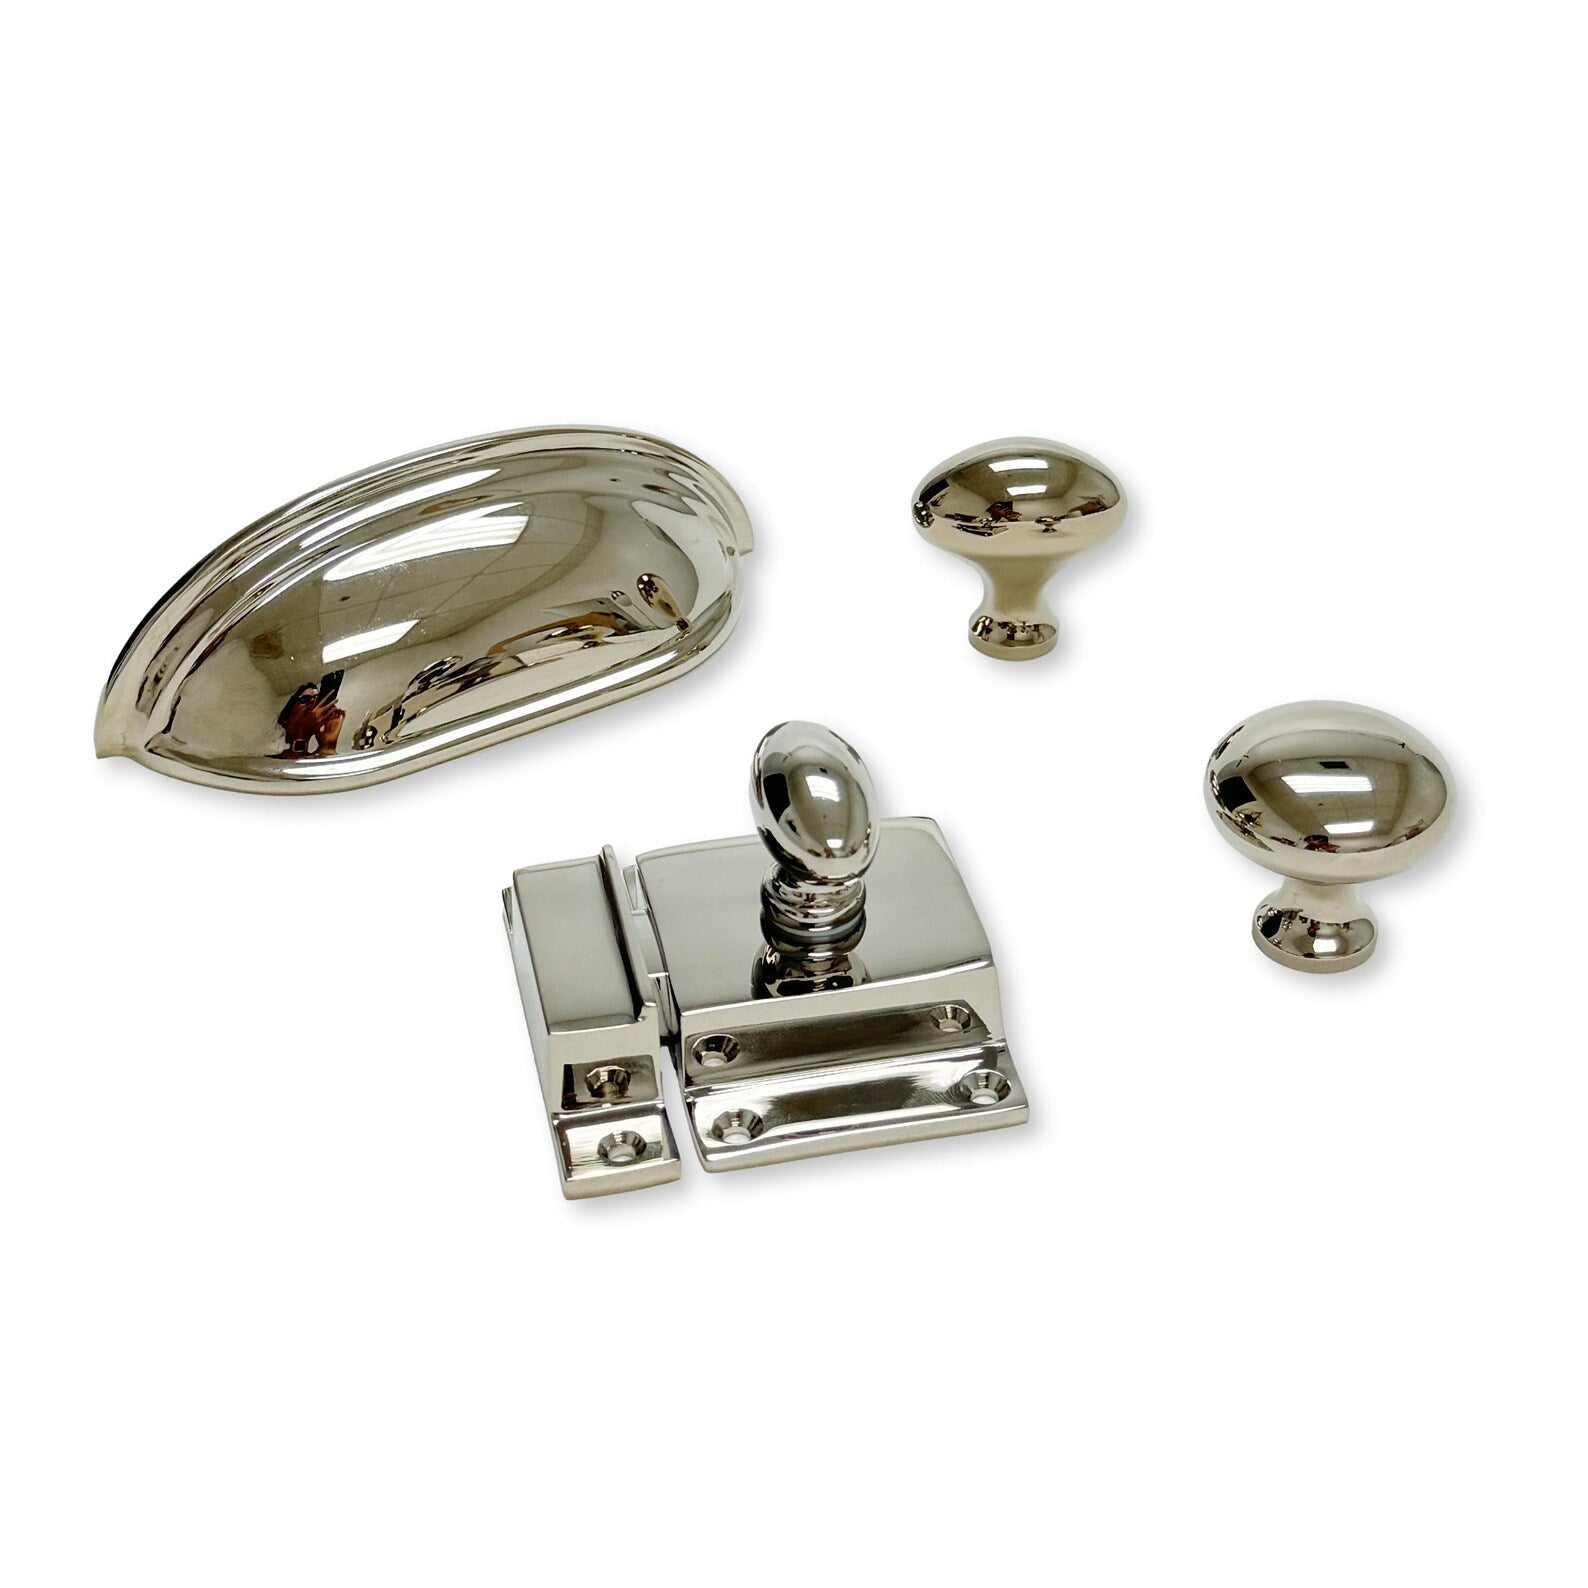 Polished Nickel "Heritage" Cabinet Knobs and Cup Pulls - Industry Hardware